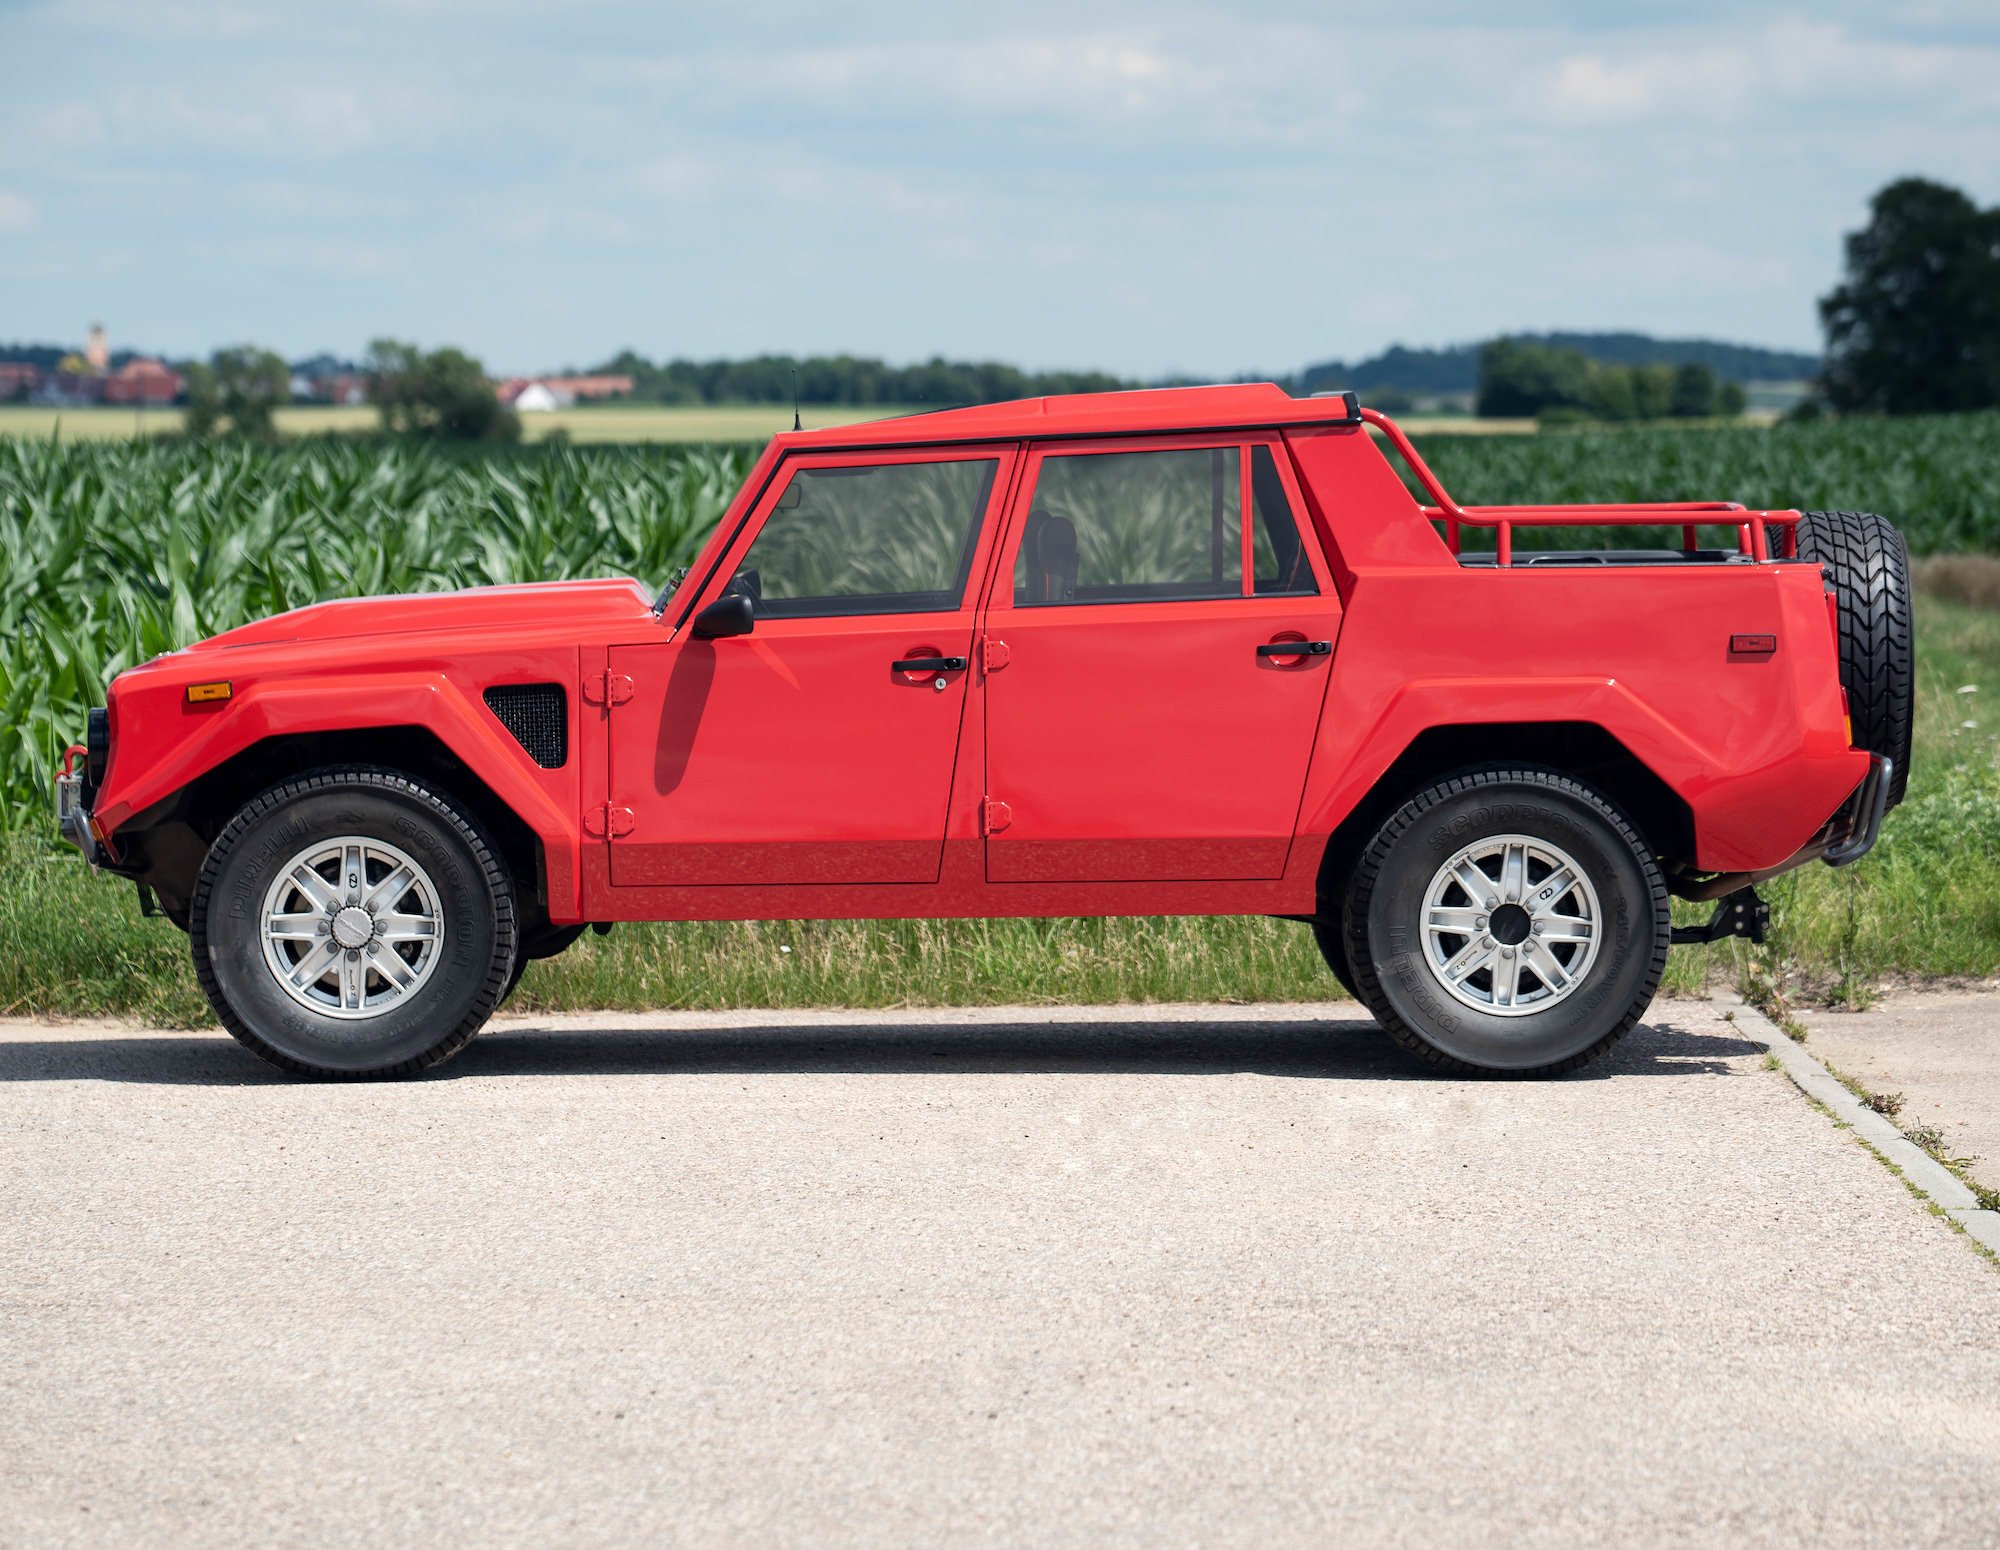 The Mighty Lamborghini LM002 – A Countach V12-Powered Luxury 4x4